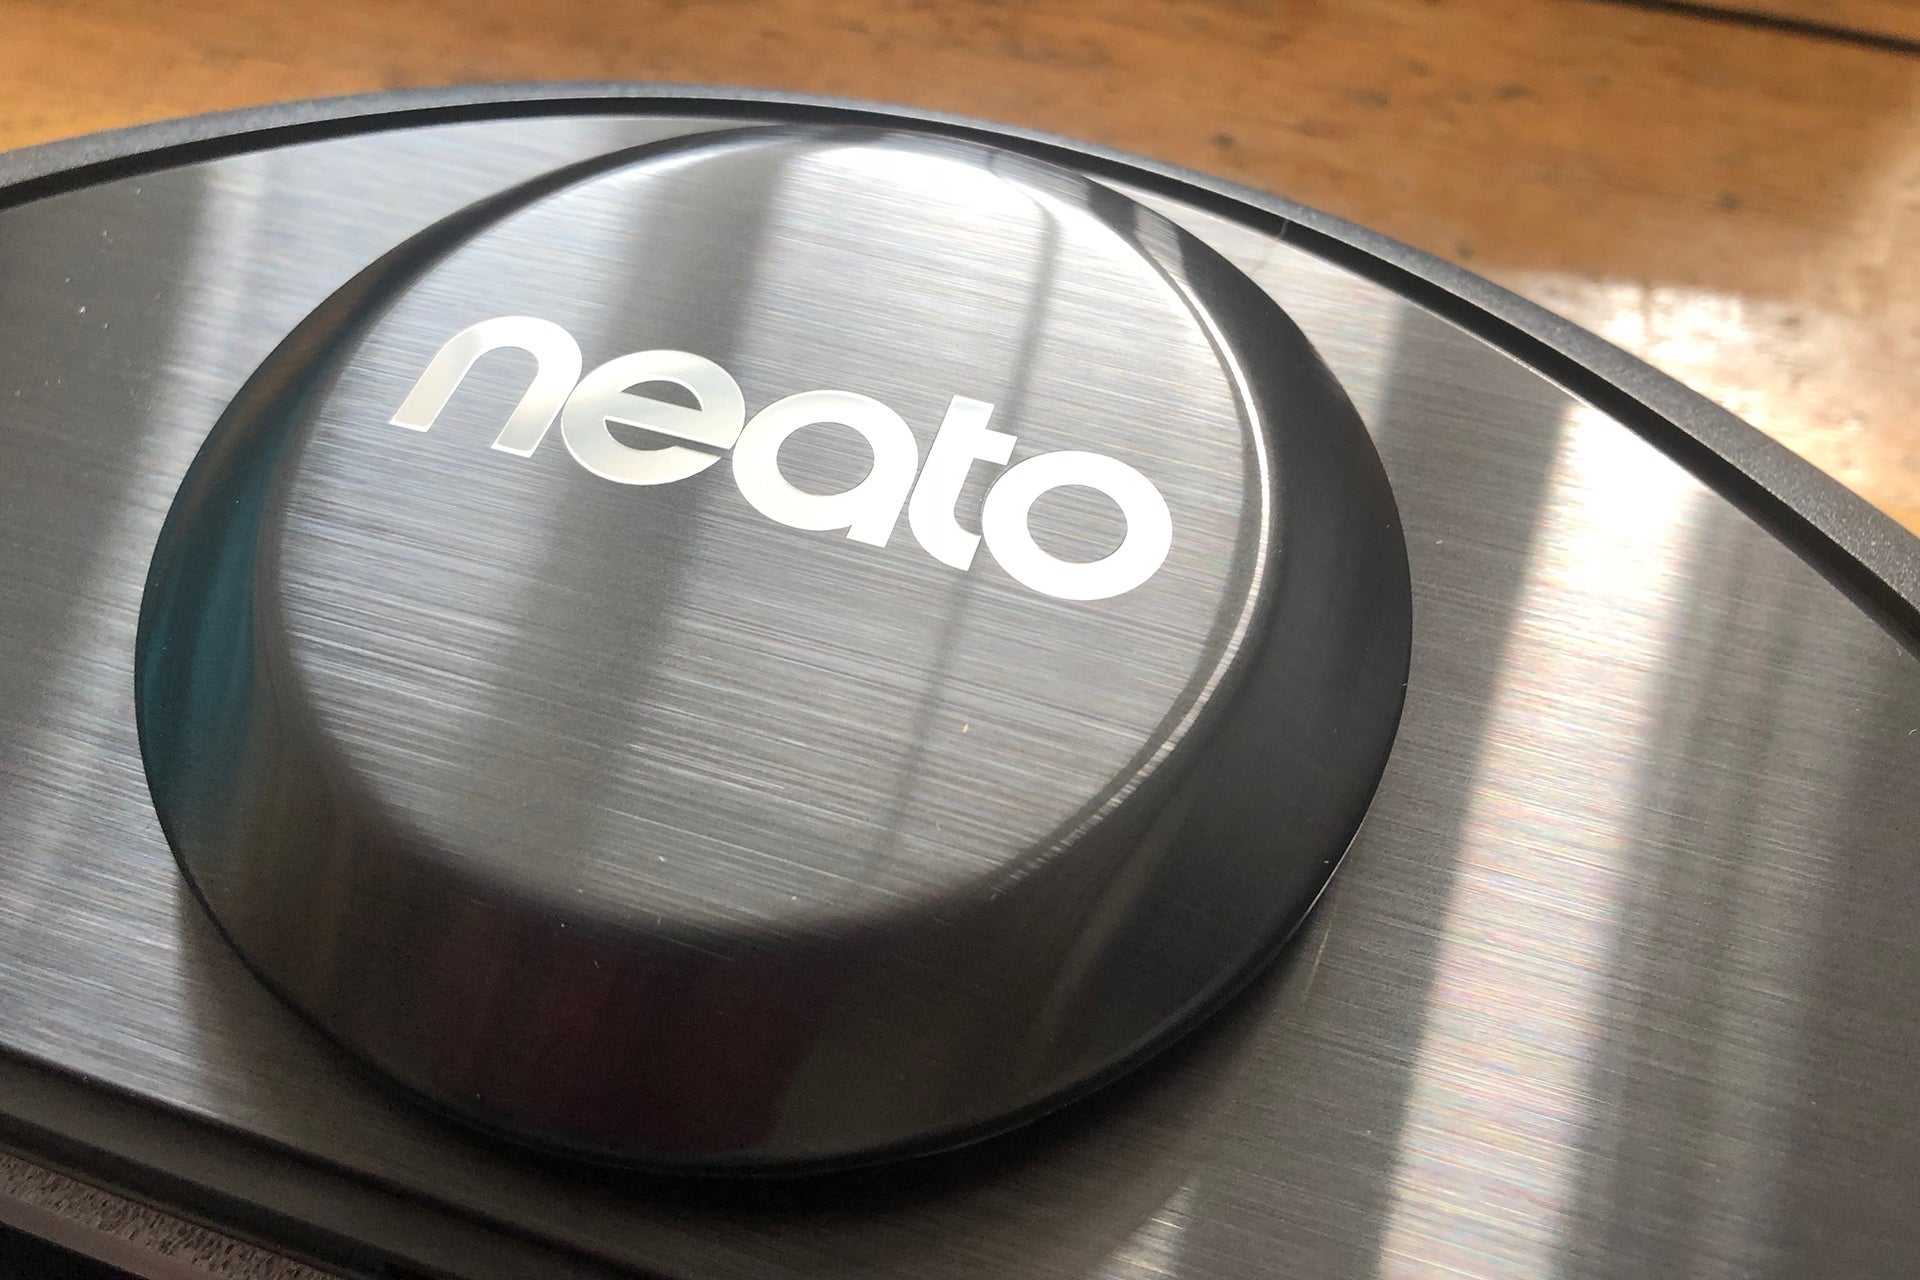 Neato Botvac D6 Connected laser navigation